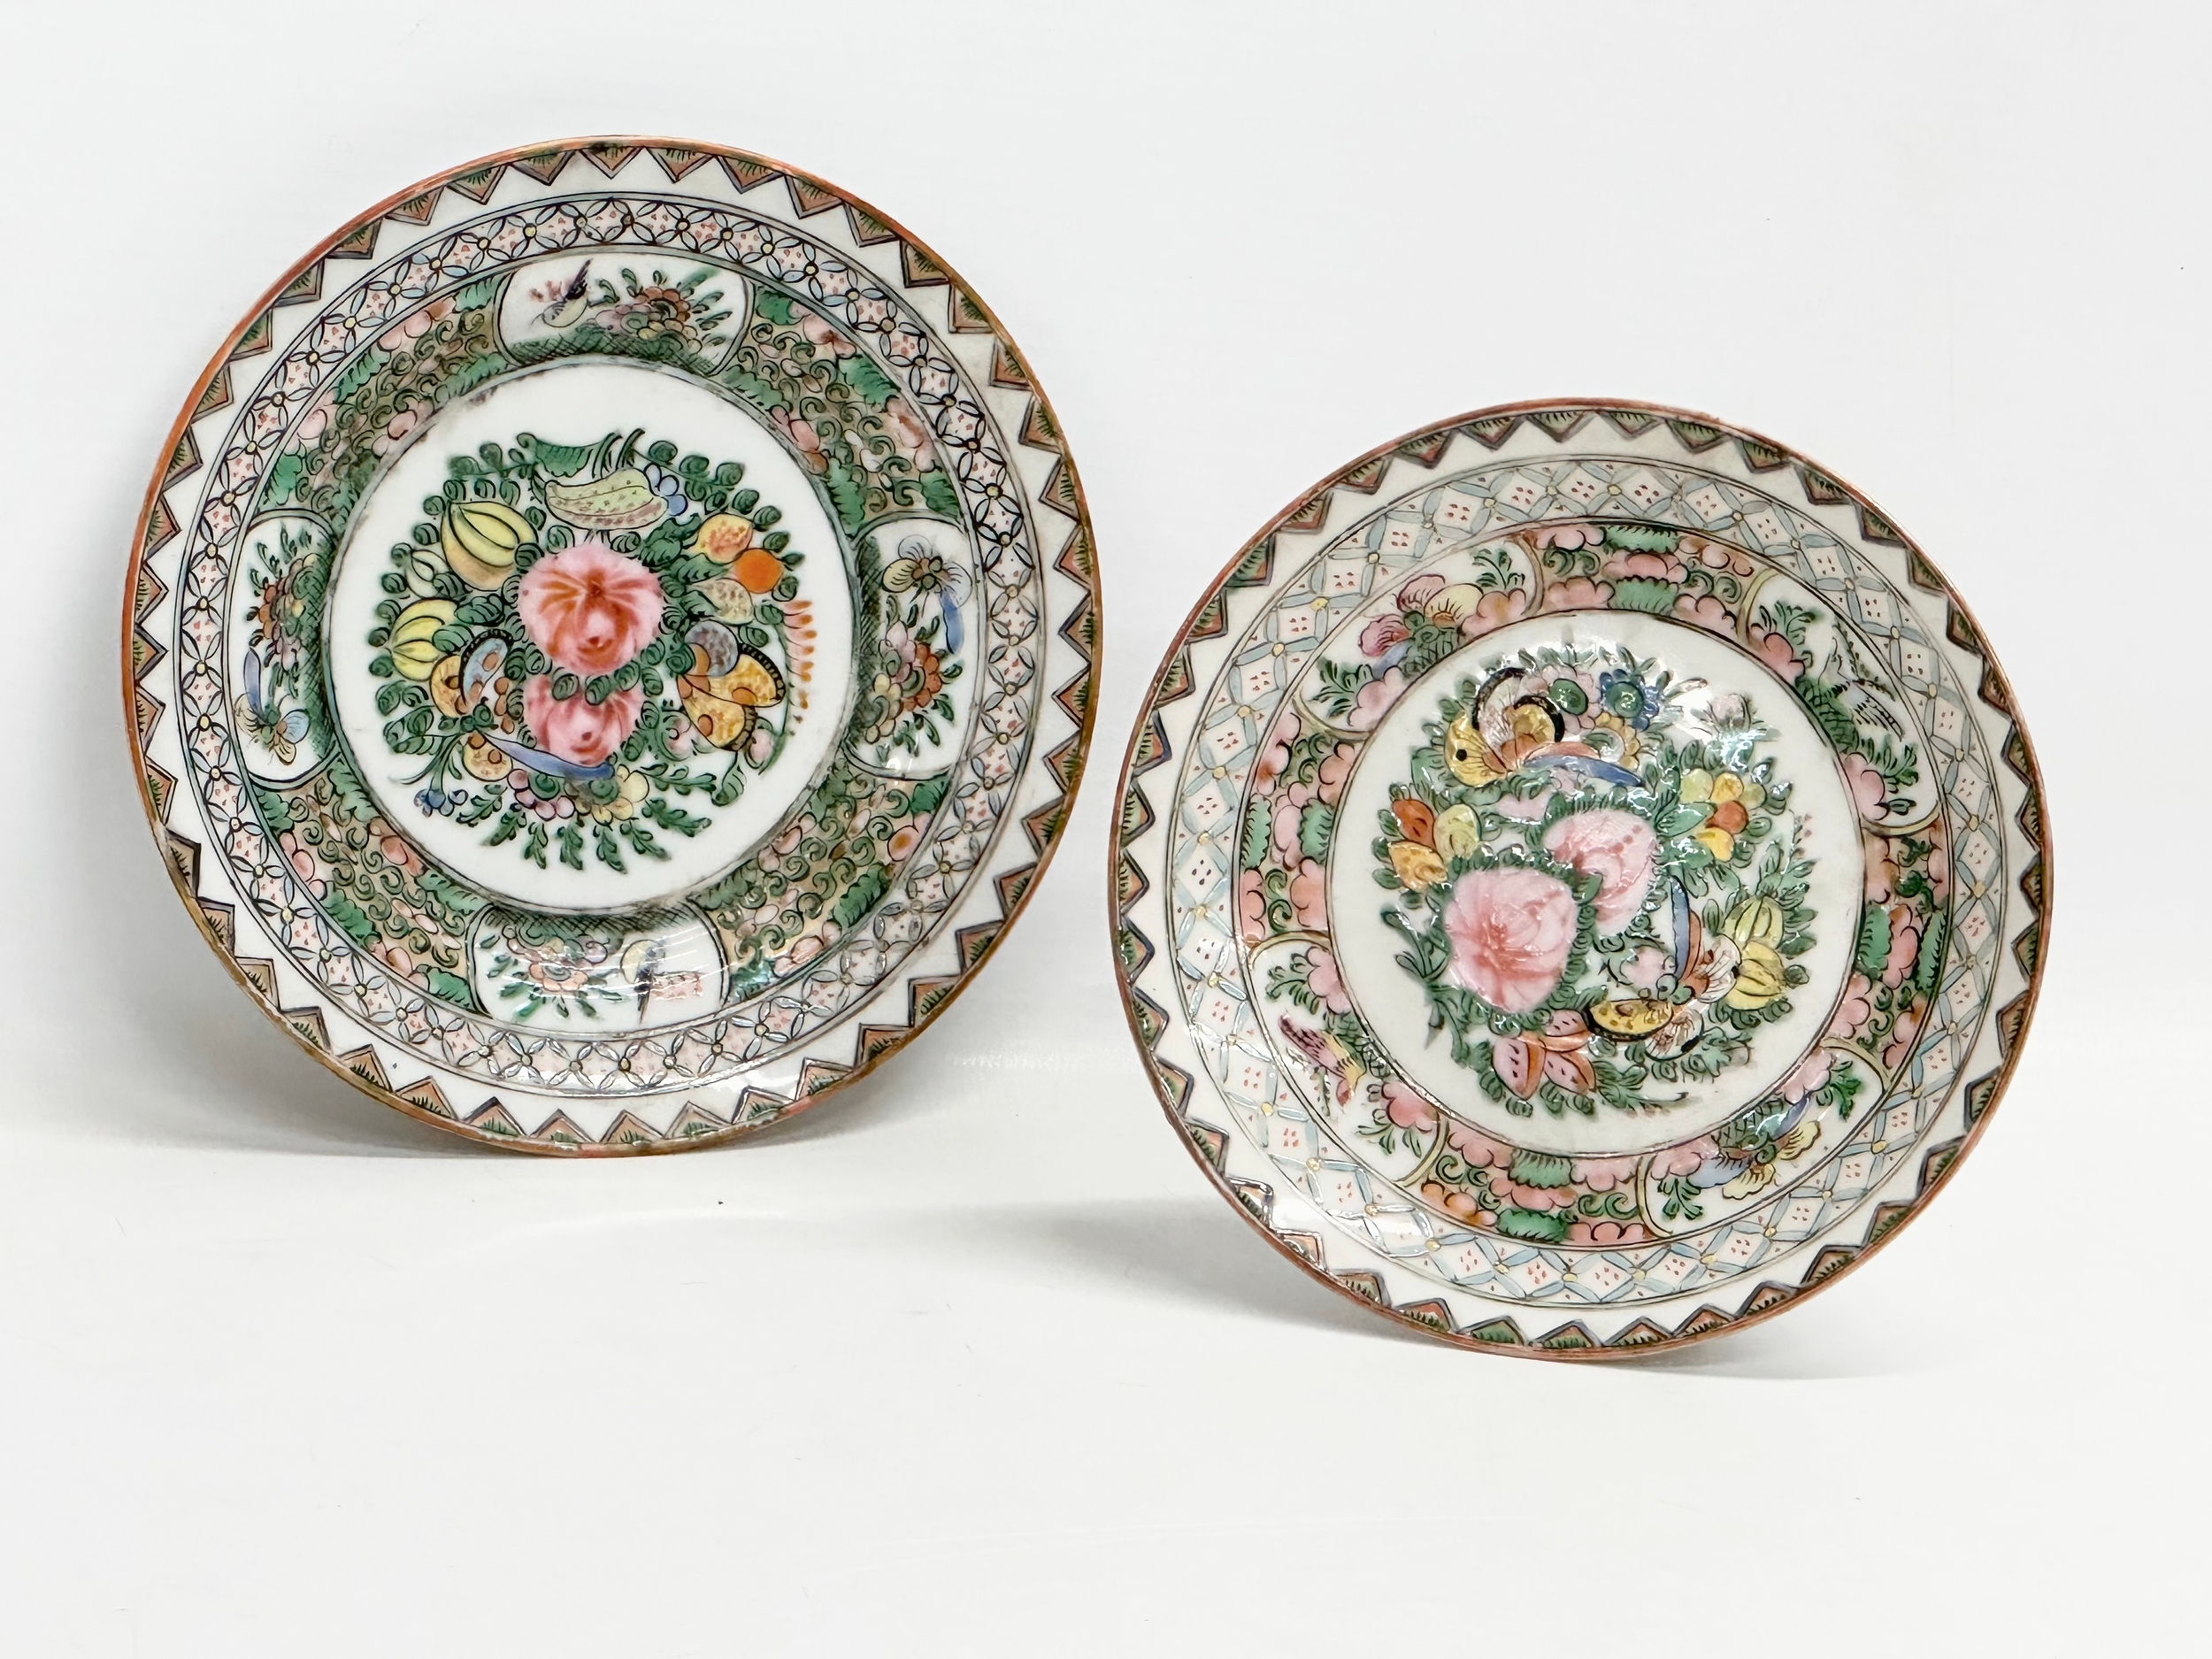 2 mid 19th century Chinese Emperor Xianfeng Rose Medallion saucer plates. 15.5cm. - Image 2 of 5